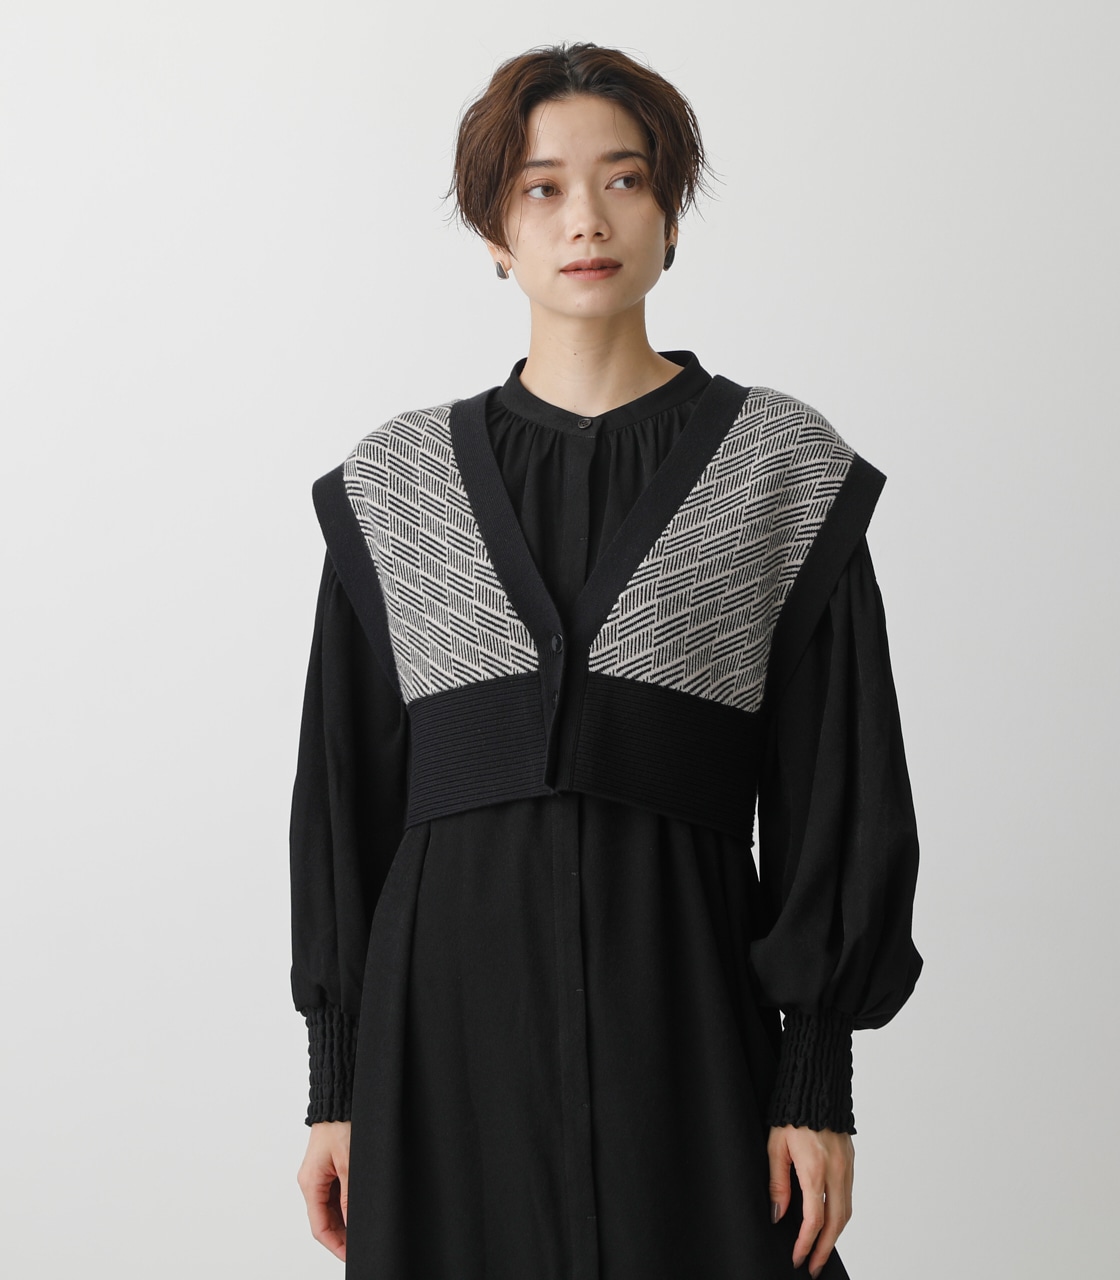 PATTERN COMPACT KNIT VEST/パターンコンパクトニットベスト 詳細画像 柄BLK 5